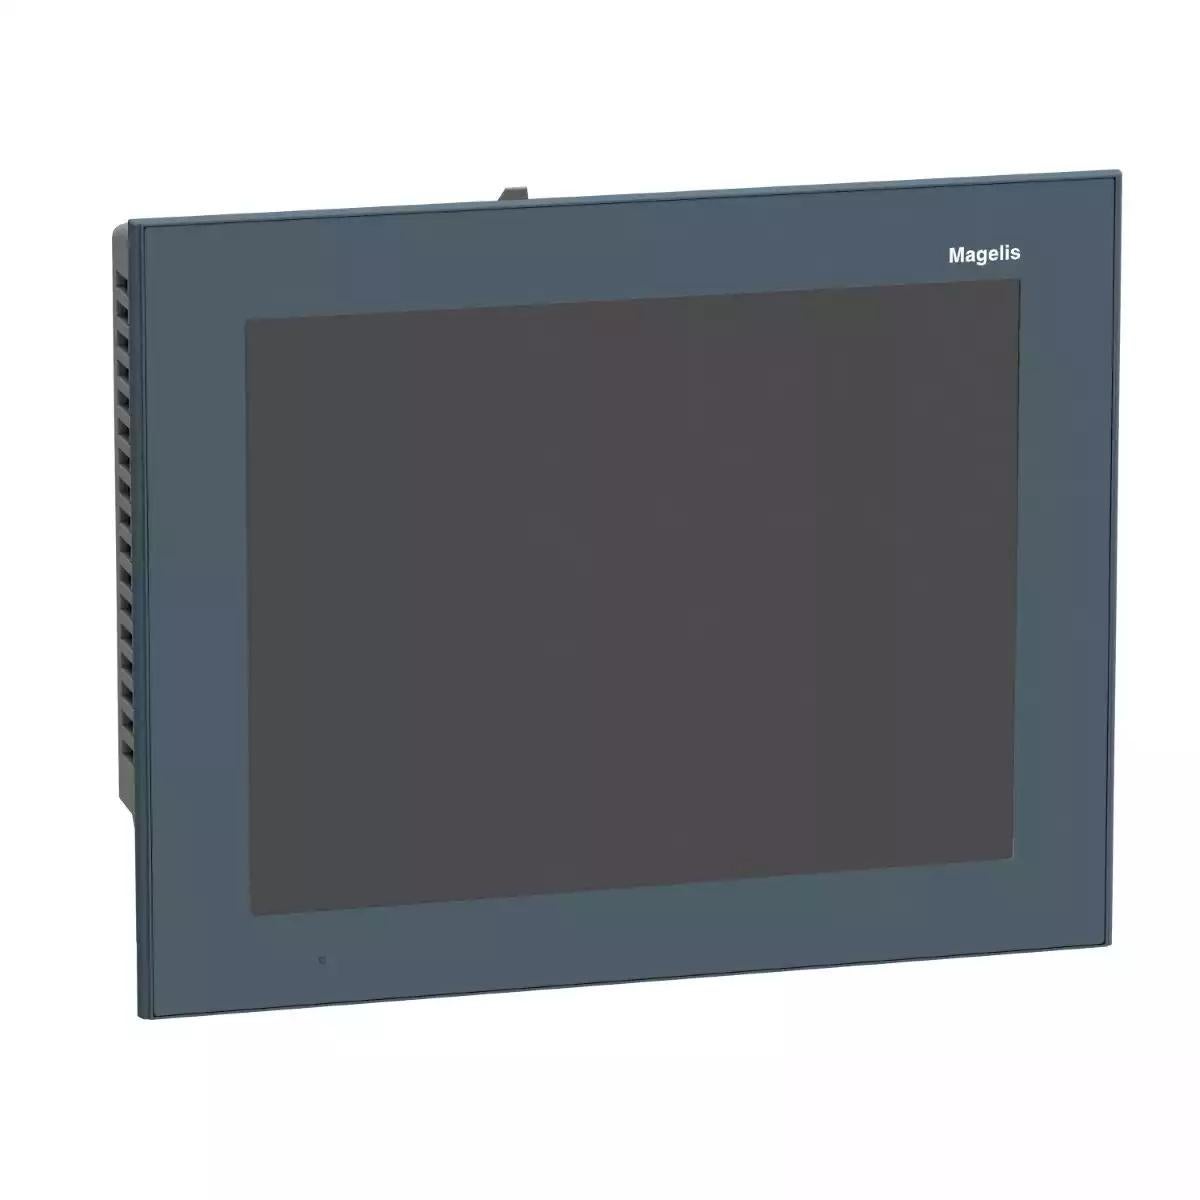 Advanced touchscreen panel, Harmony GTO, 10.4 Color Touch VGA TFT, logo removed